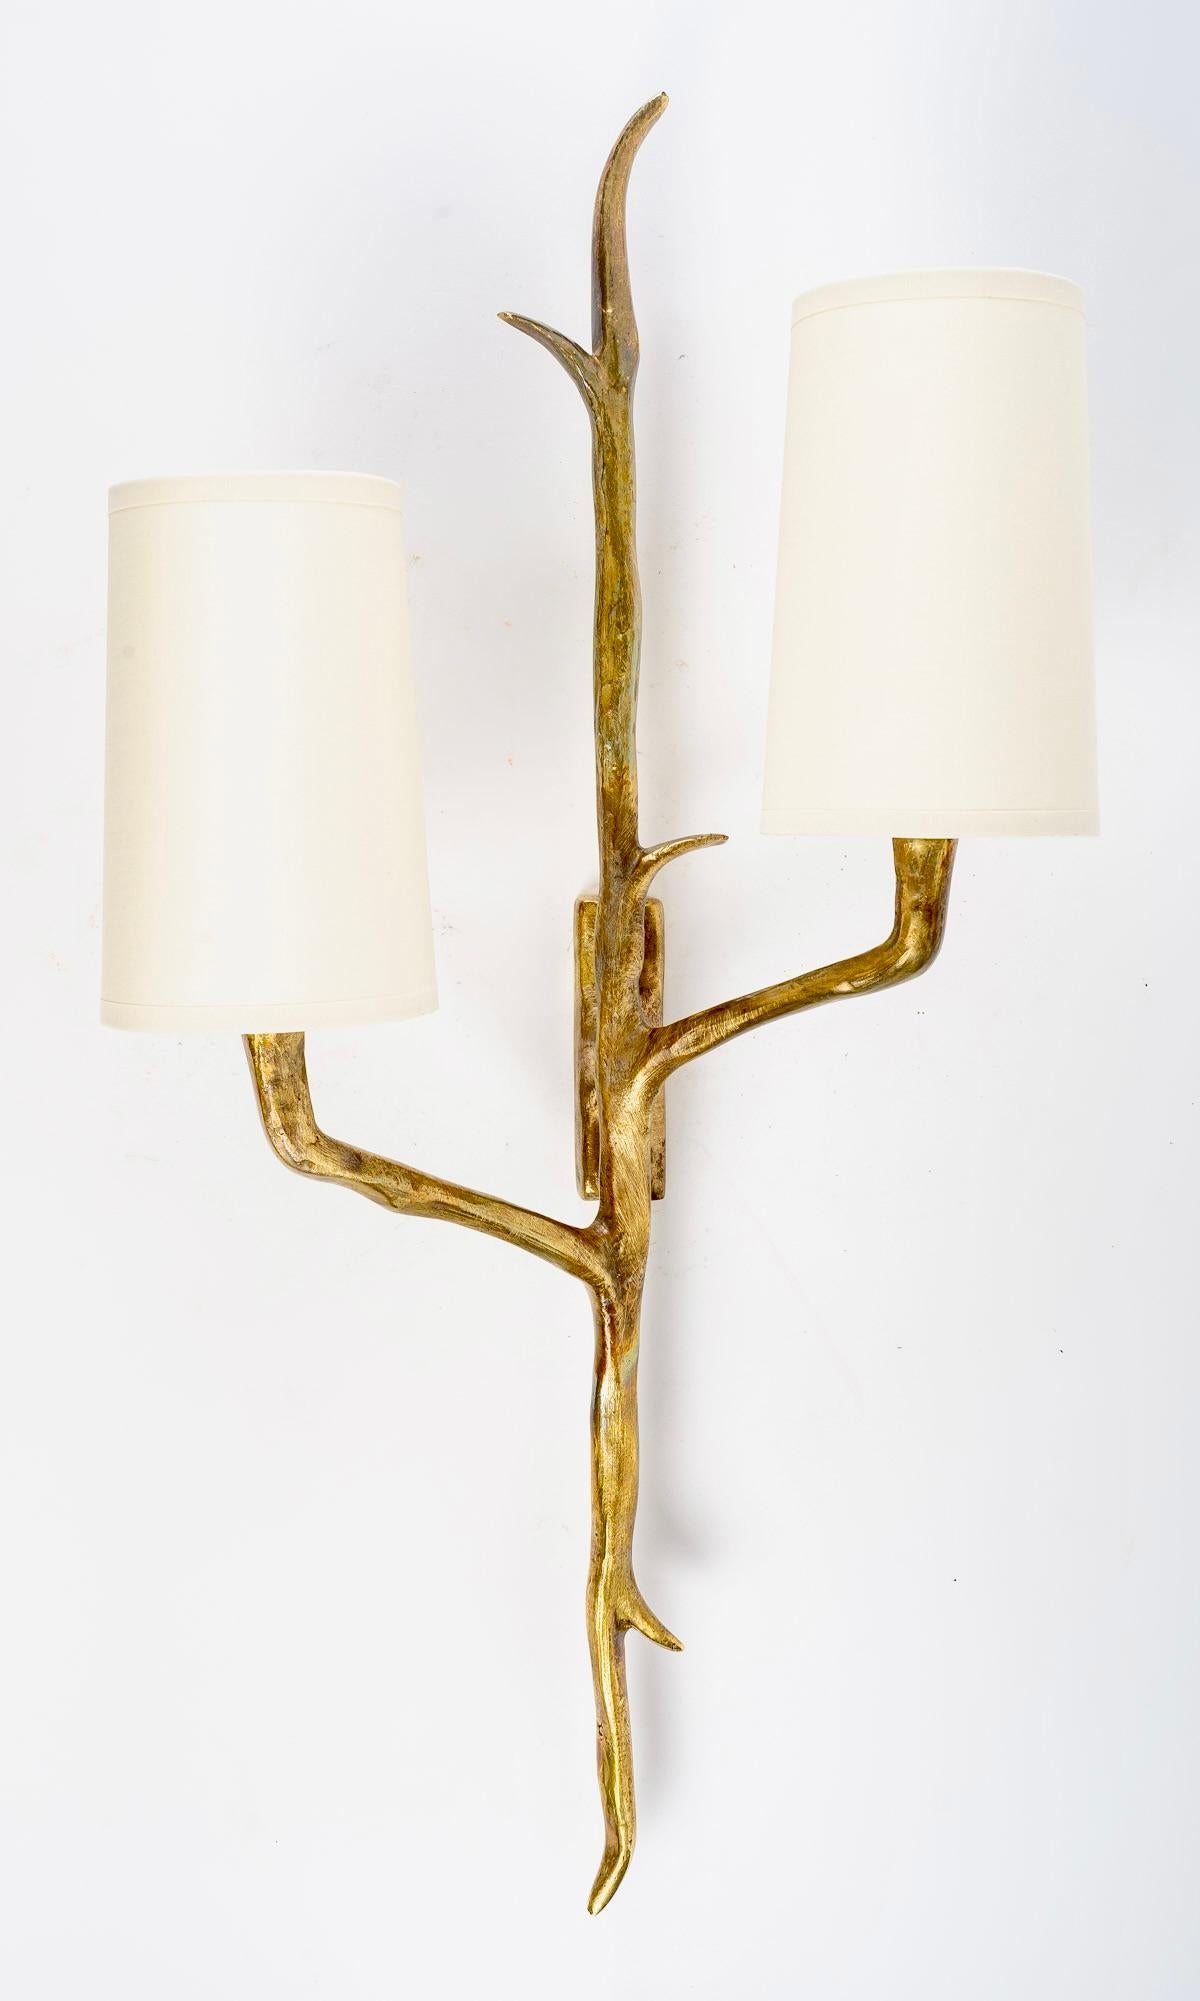 1950 large pair of sconces in bronze Félix Agostini for Arlus 
Composed of a central arm in the shape of a branch decorated with two small branches forming the two arms of light placed on either side of the central arm positioned at two different